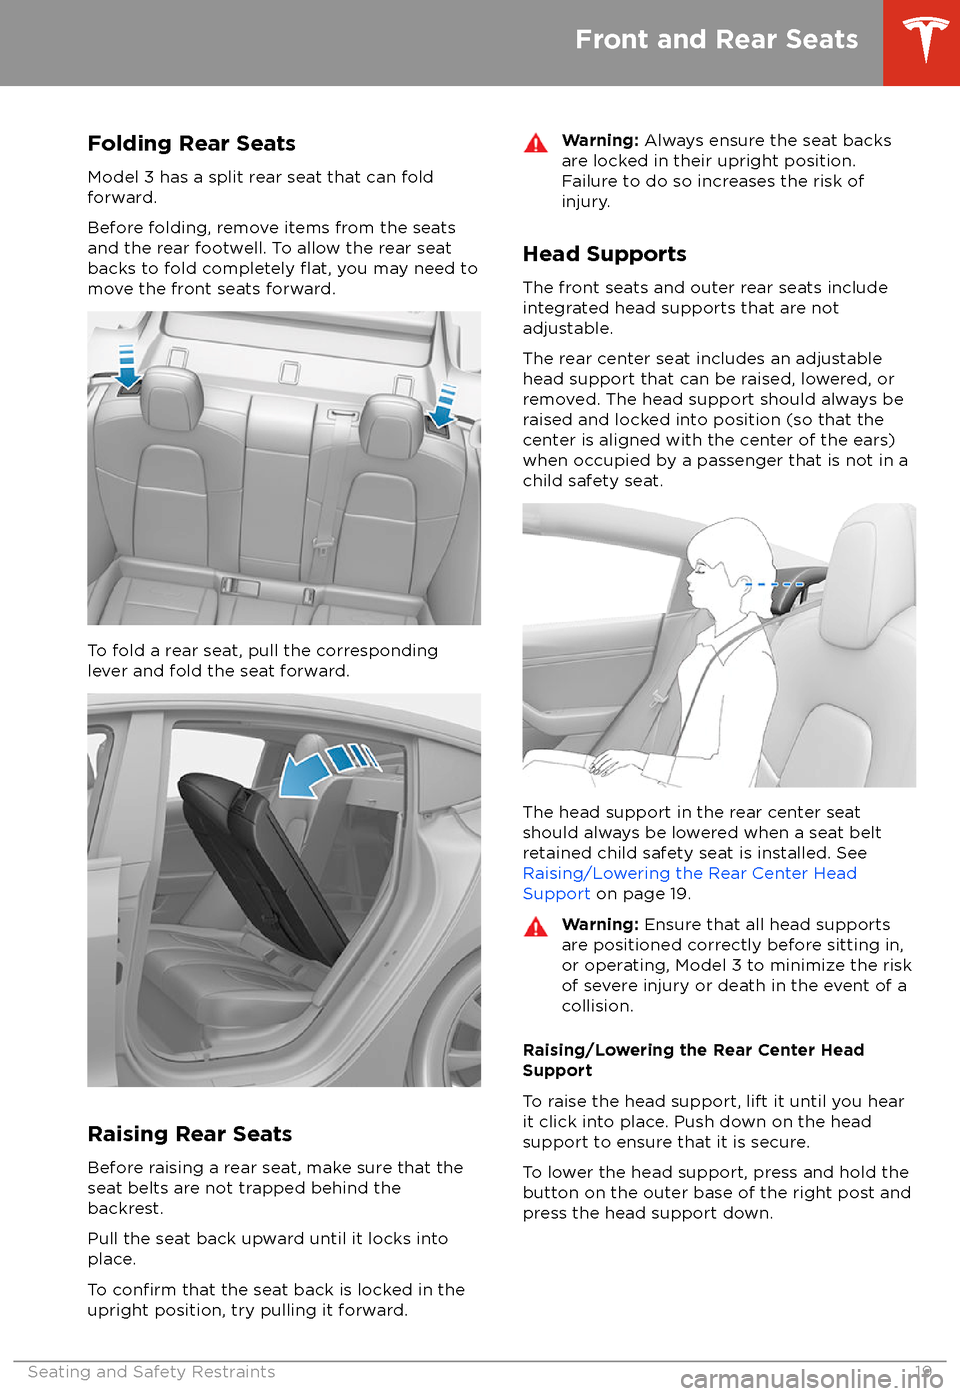 TESLA MODEL 3 2018  Owners Manual Folding Rear Seats
Model 3 has a split rear seat that can fold
forward.
Before folding, remove items from the seats
and the rear footwell. To allow the rear seat
backs to fold completely 
flat, you ma